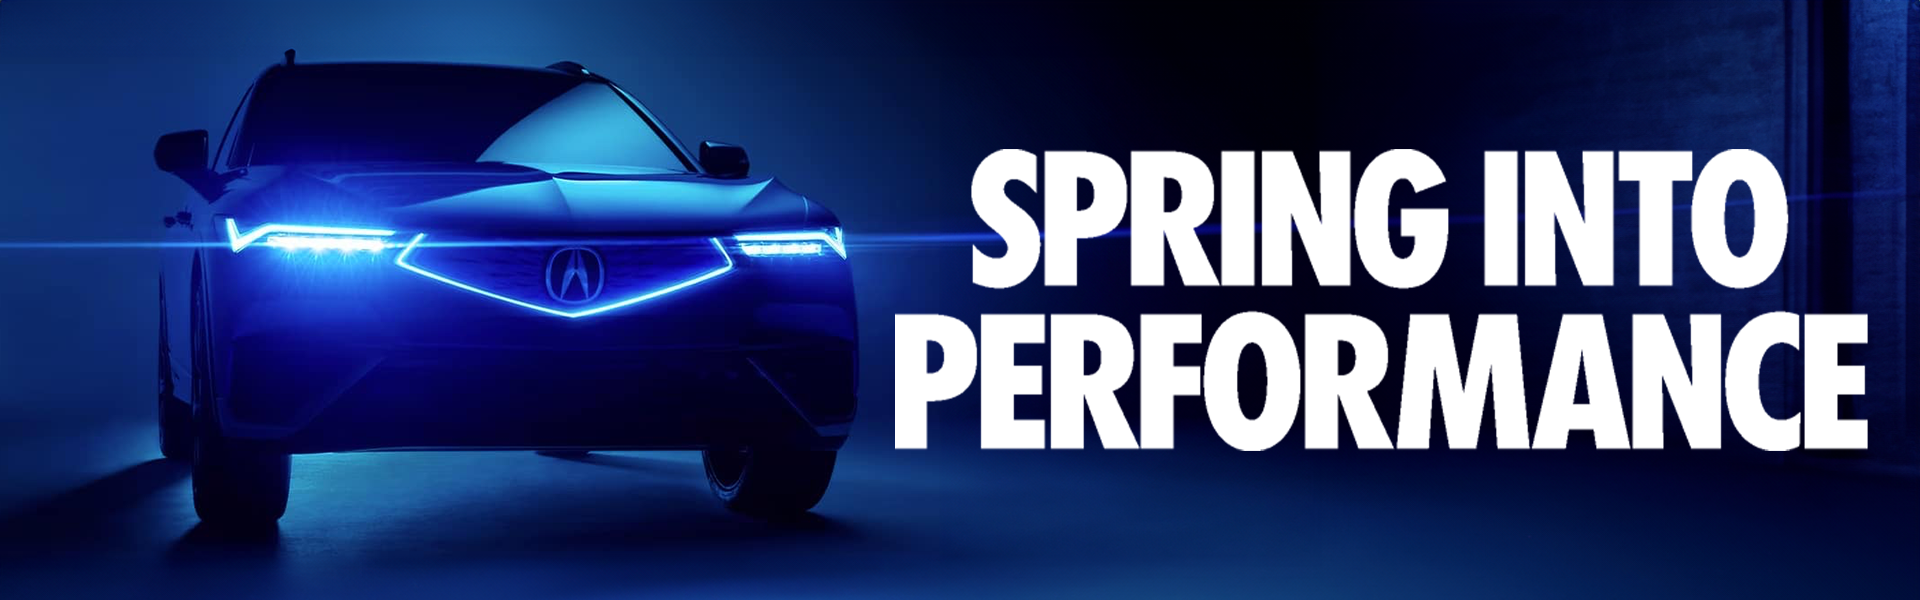 Spring Into Performance at Acura of Wayne